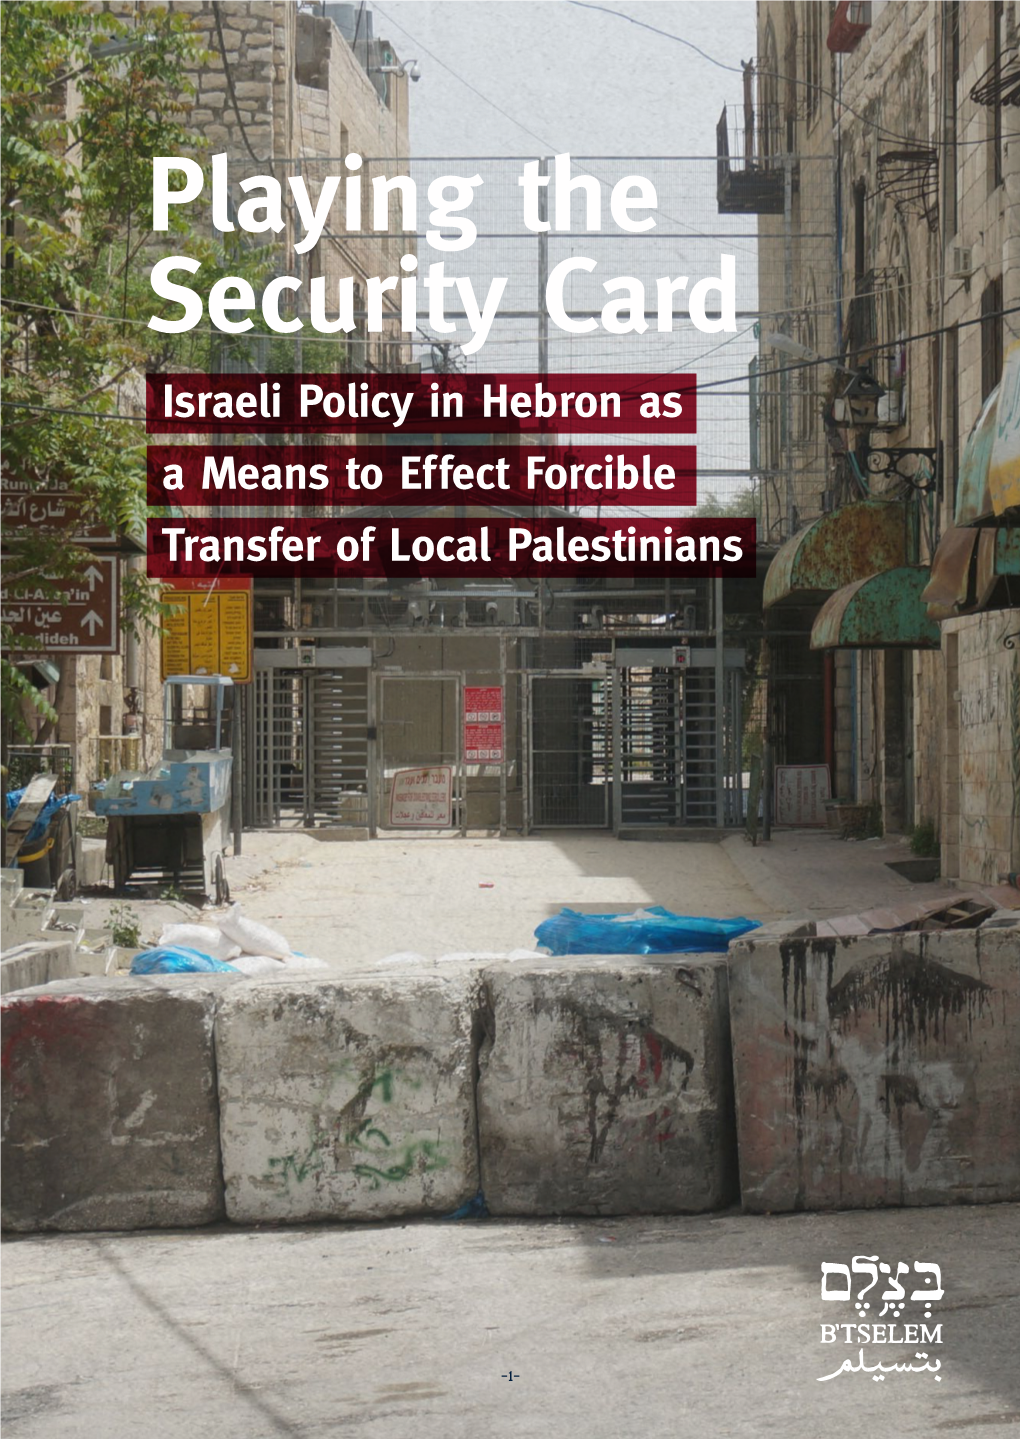 Playing the Security Card: Israeli Policy in Hebron As Means To